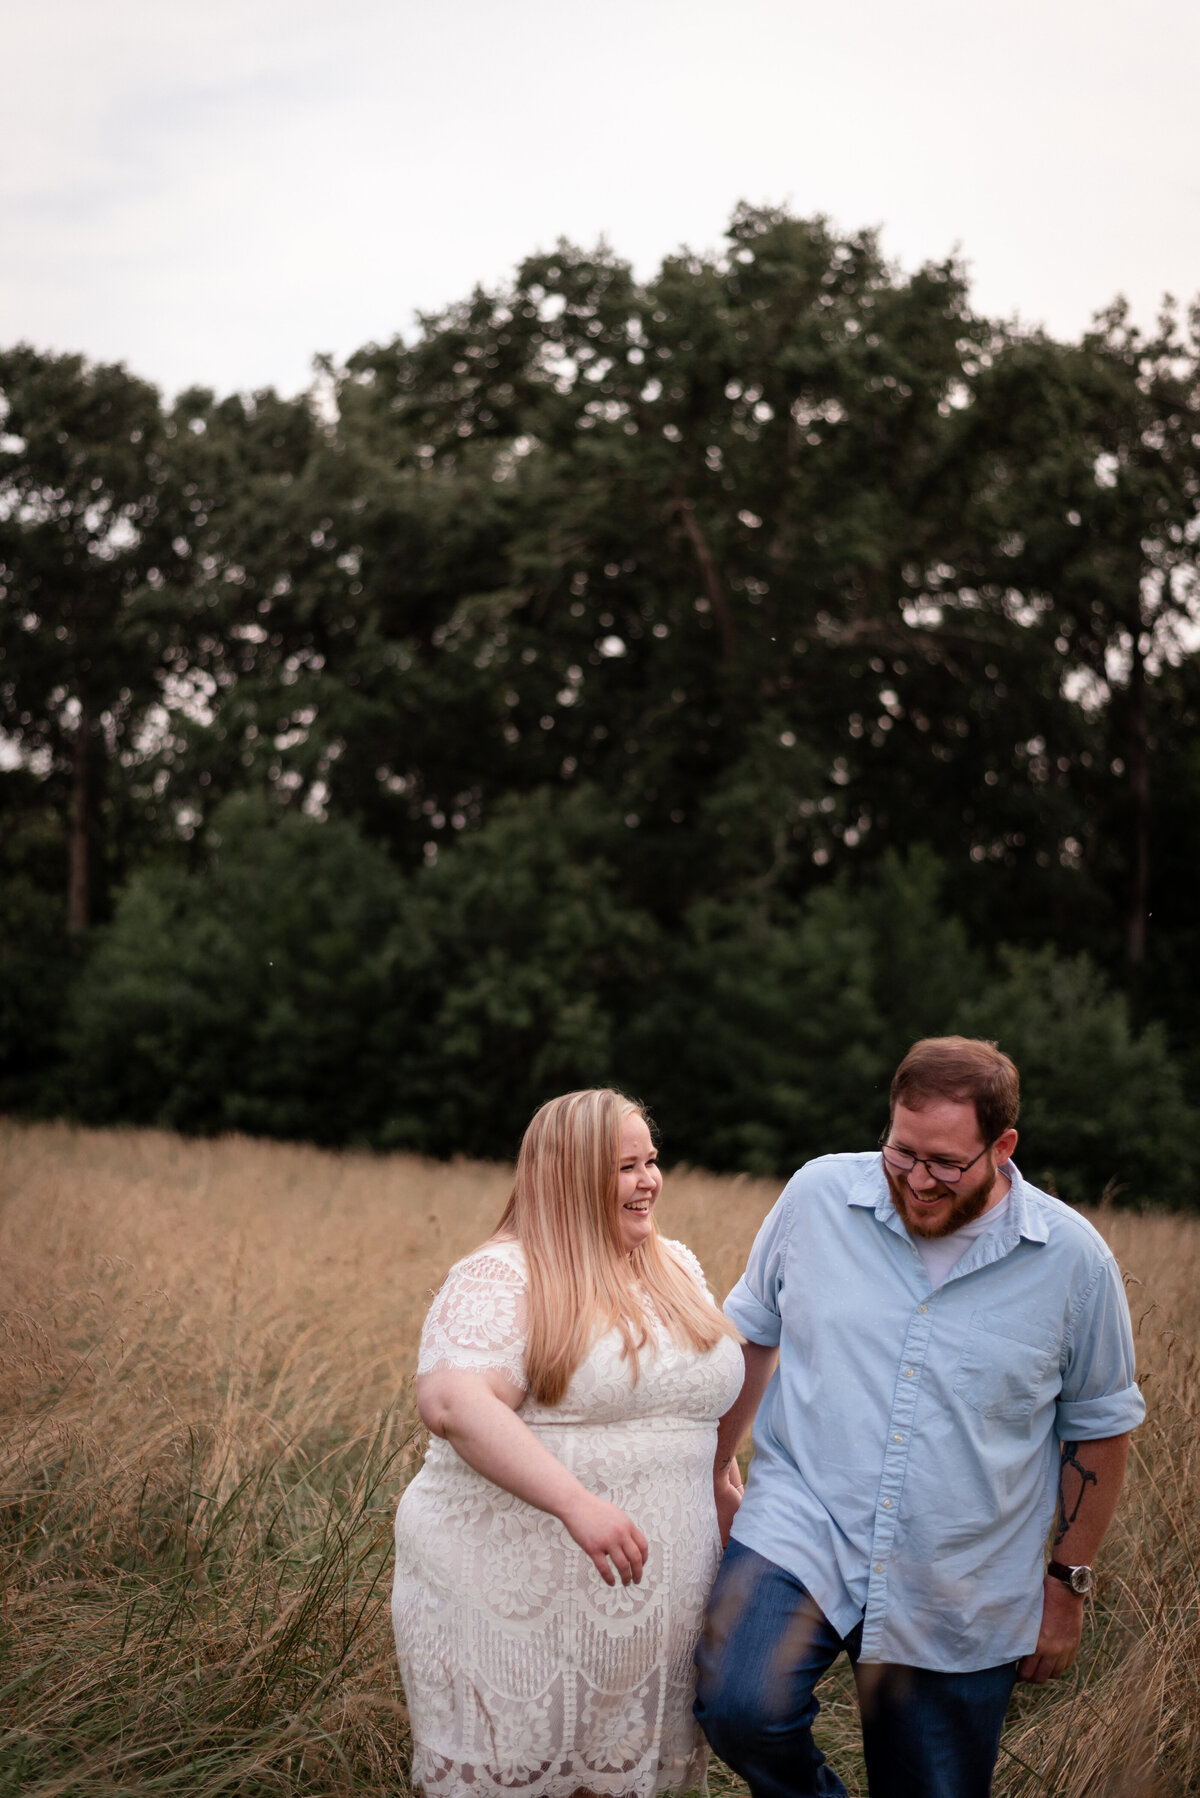 ouabache state park in bluffton indiana engagement photographer